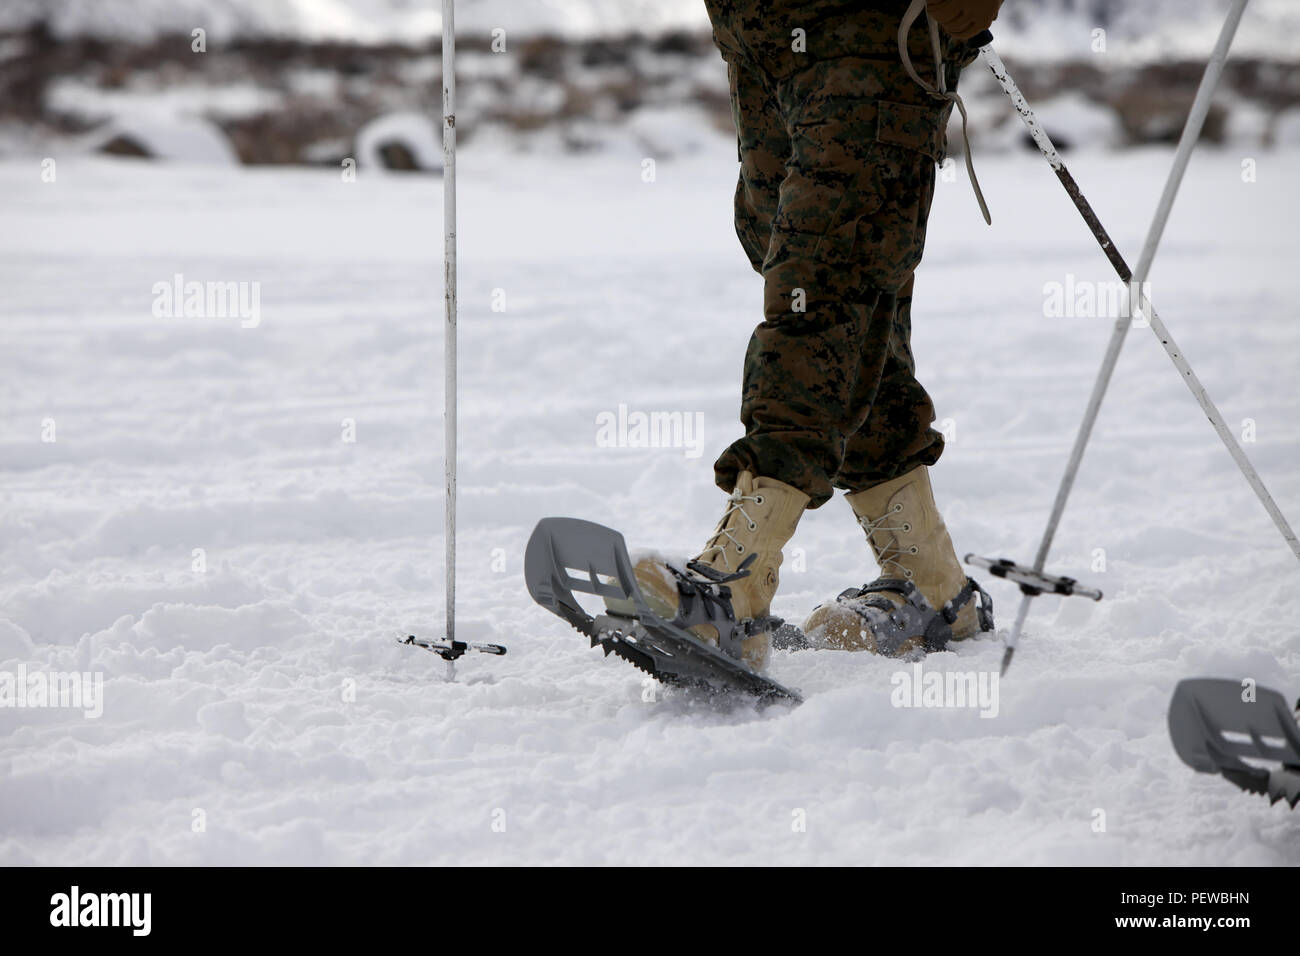 A Marine uses snowshoes for the first time during cold weather training at  Marine Corps Mountain Warfare Training Center, Calif., Jan. 21, 2016.  Snowshoes are implemented in the training for Marines to